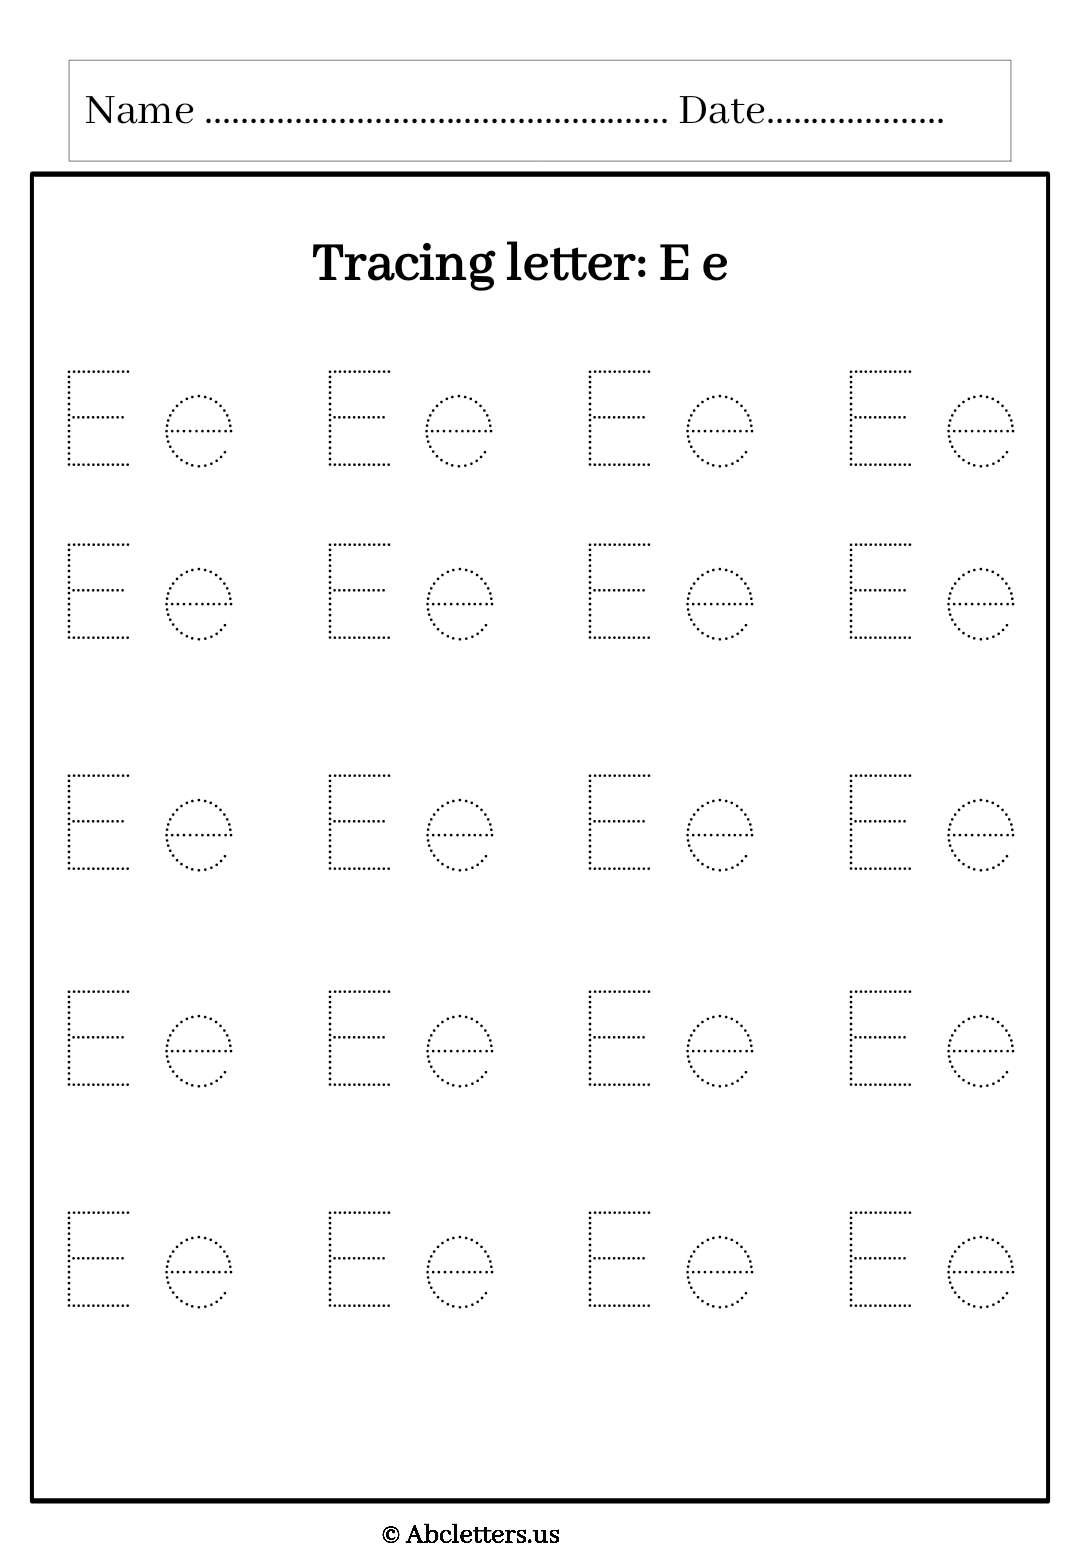 Tracing letter Ee